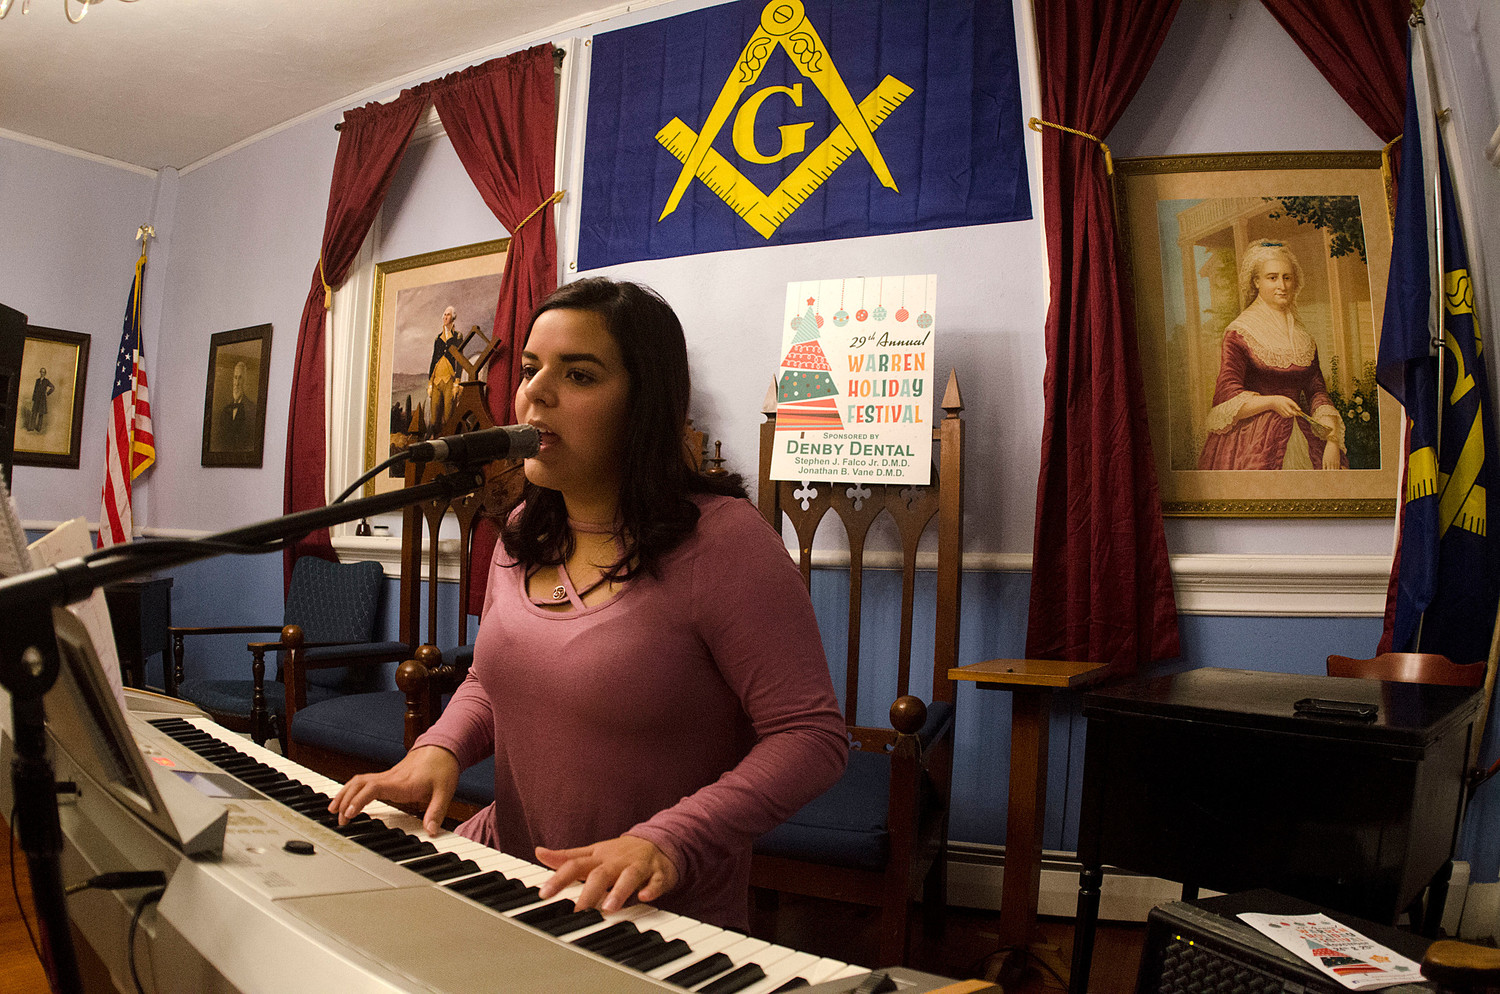 Bianca Cabral sings an original song called "Lost" for a small gathering in the Masonic Temple.